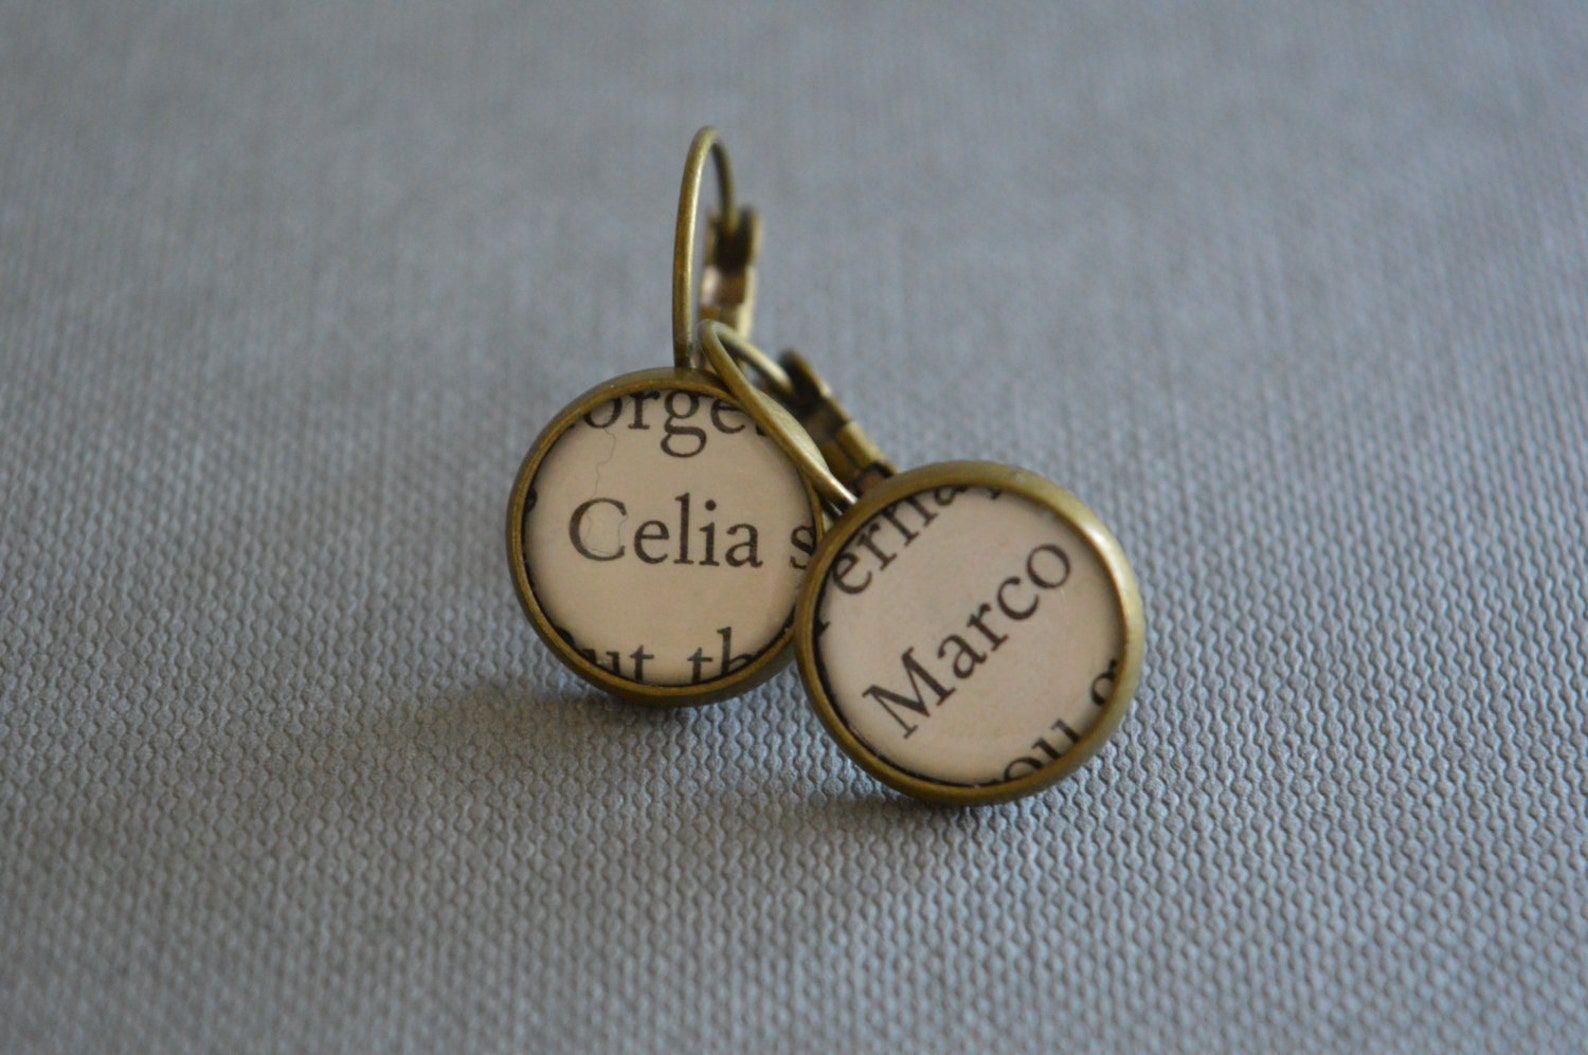 Two bronze earrings displaying the names Celia and Marco.